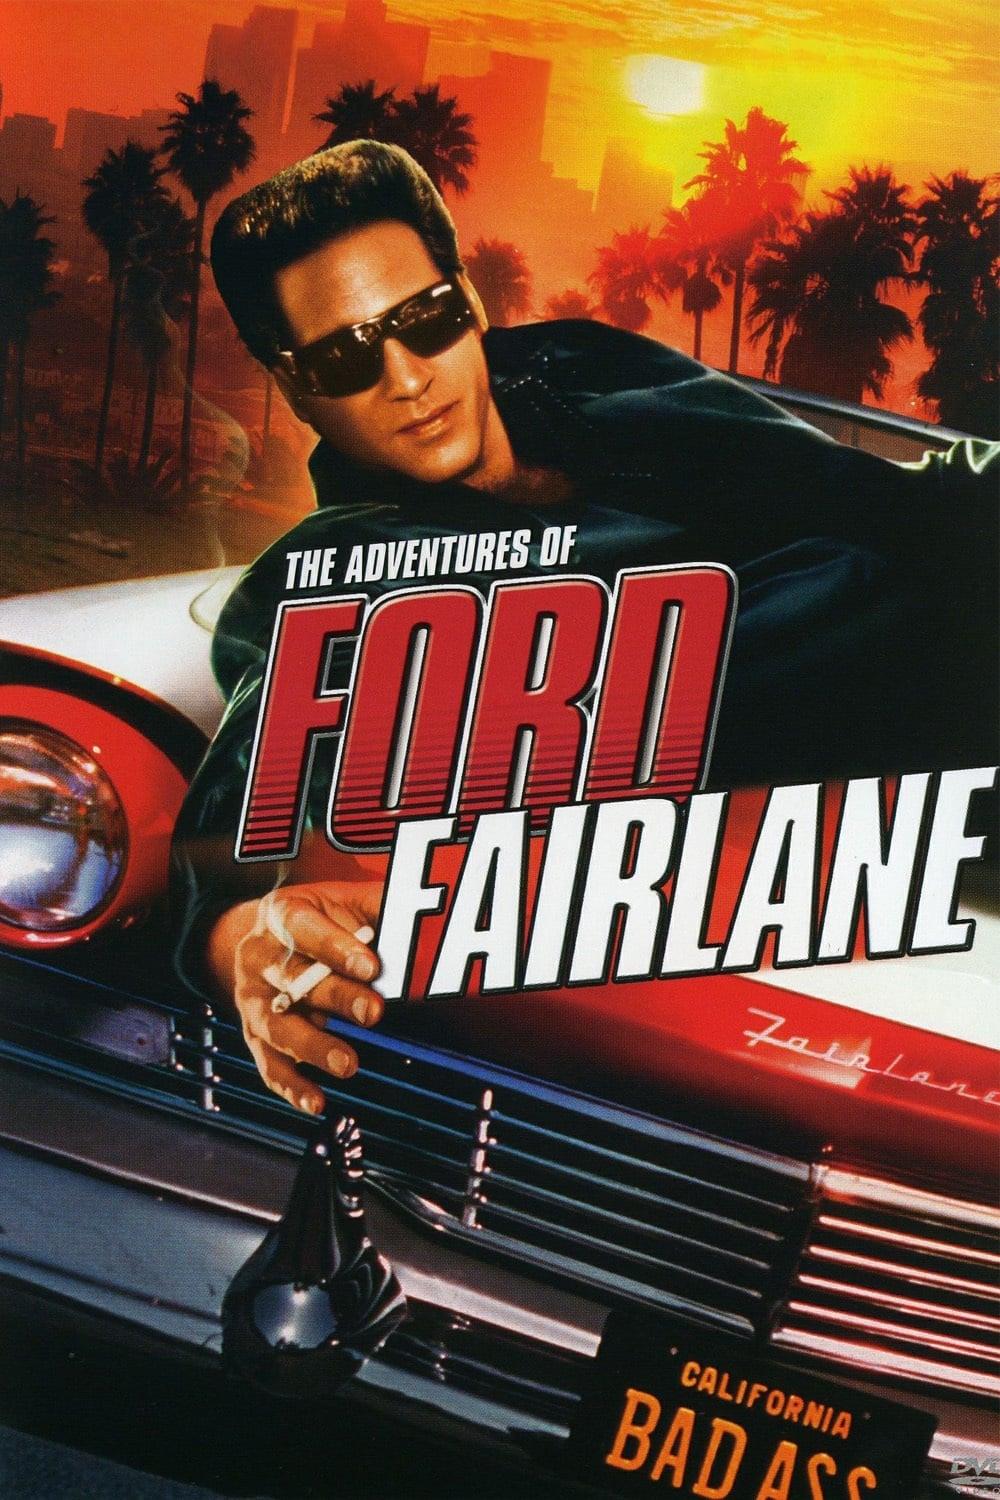 The Adventures of Ford Fairlane poster